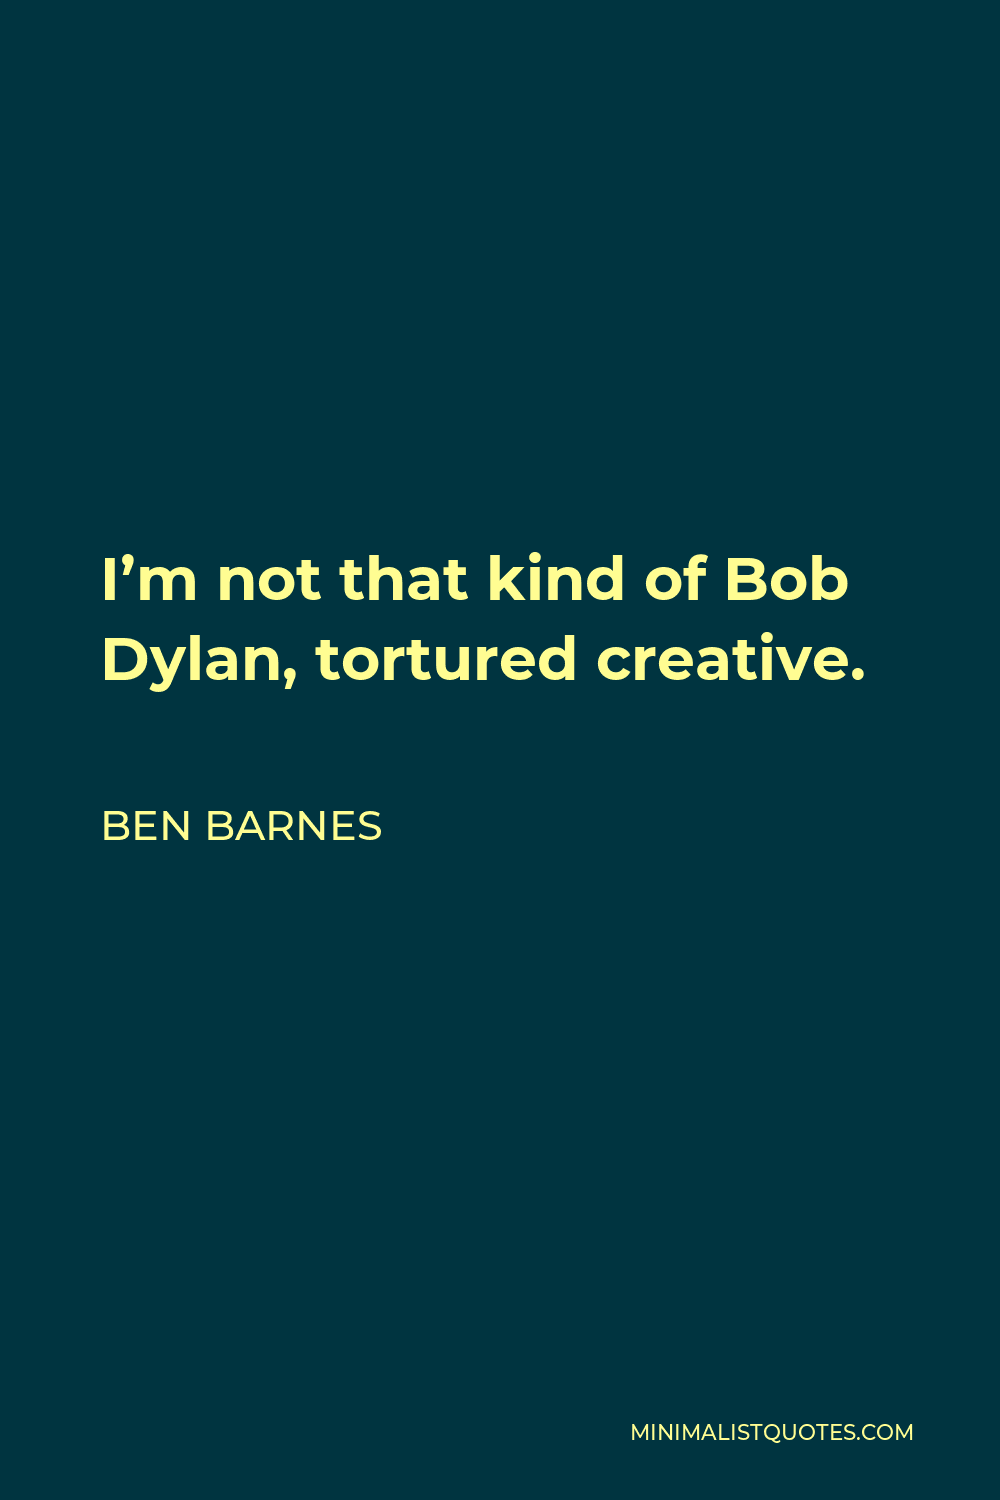 Ben Barnes Quote - I’m not that kind of Bob Dylan, tortured creative.